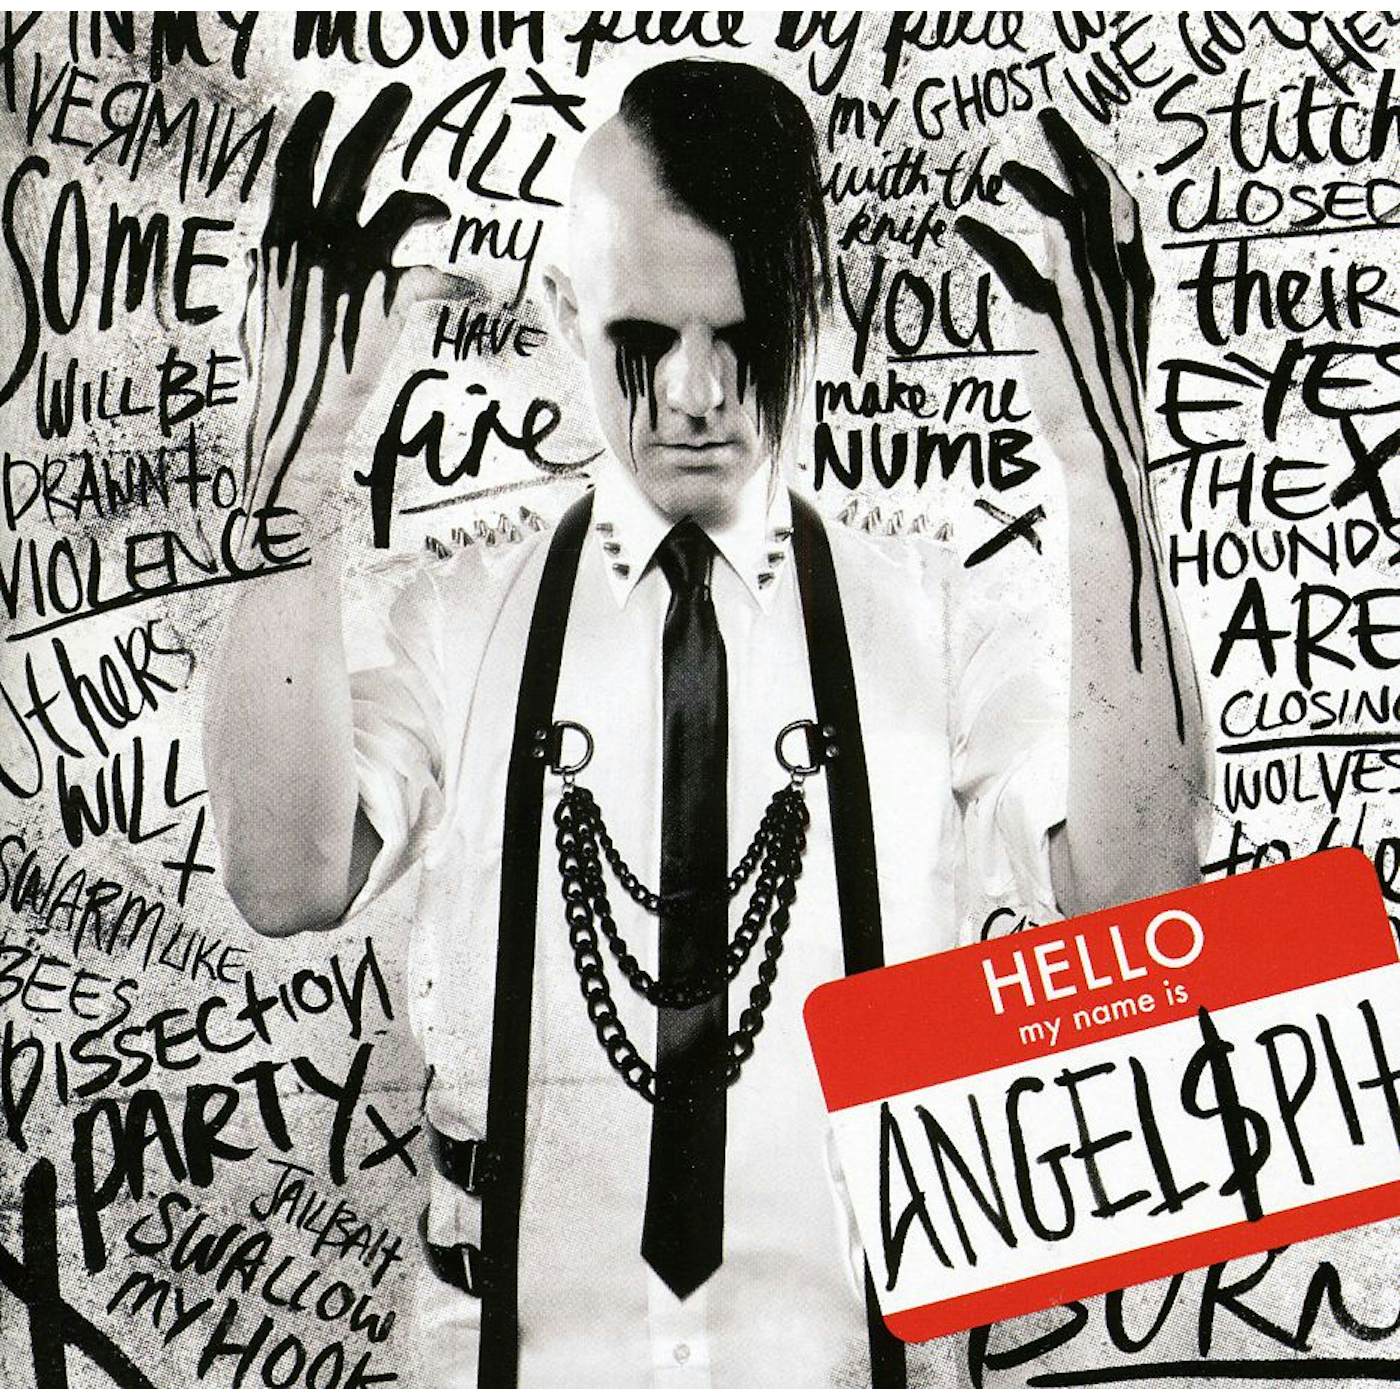 Angelspit HELLO MY NAME IS CD